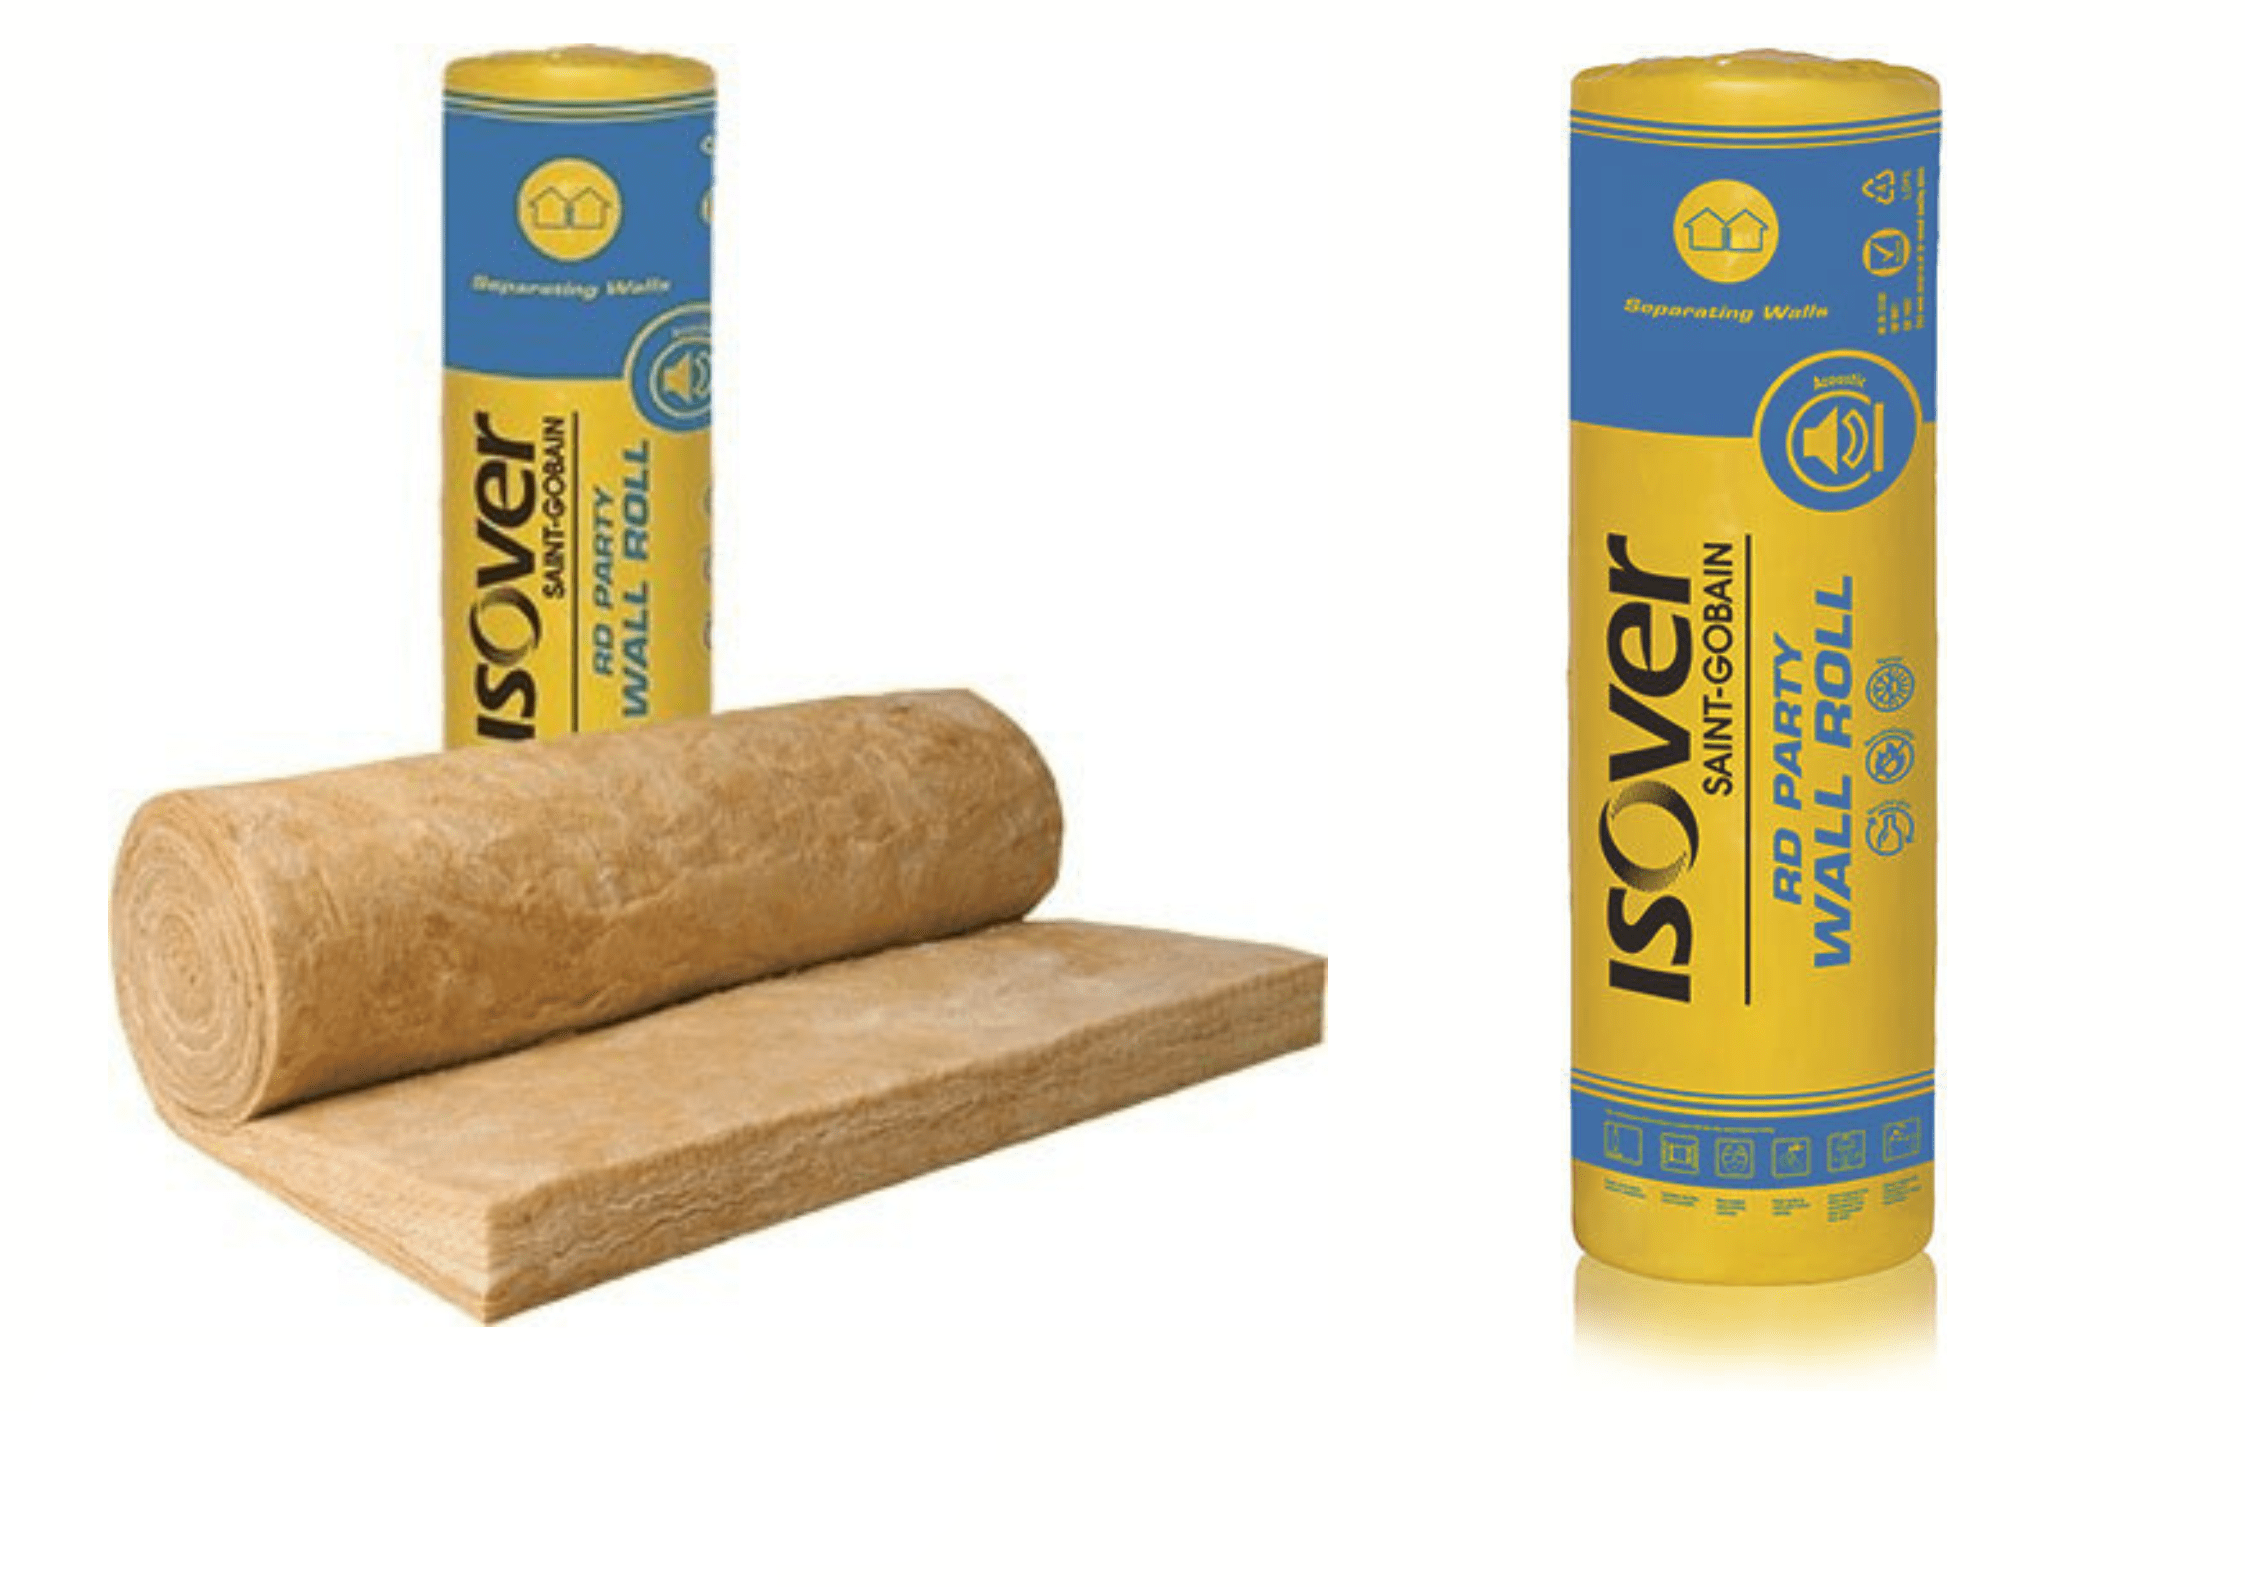 Isover Insulation 50 x 9300 x 1200mm - 11.16m2 Isover RD Party Wall Roll Acoustic Insulation Roll Isover Spacesaver Lite Insulation Roll | insulationuk.co.uk